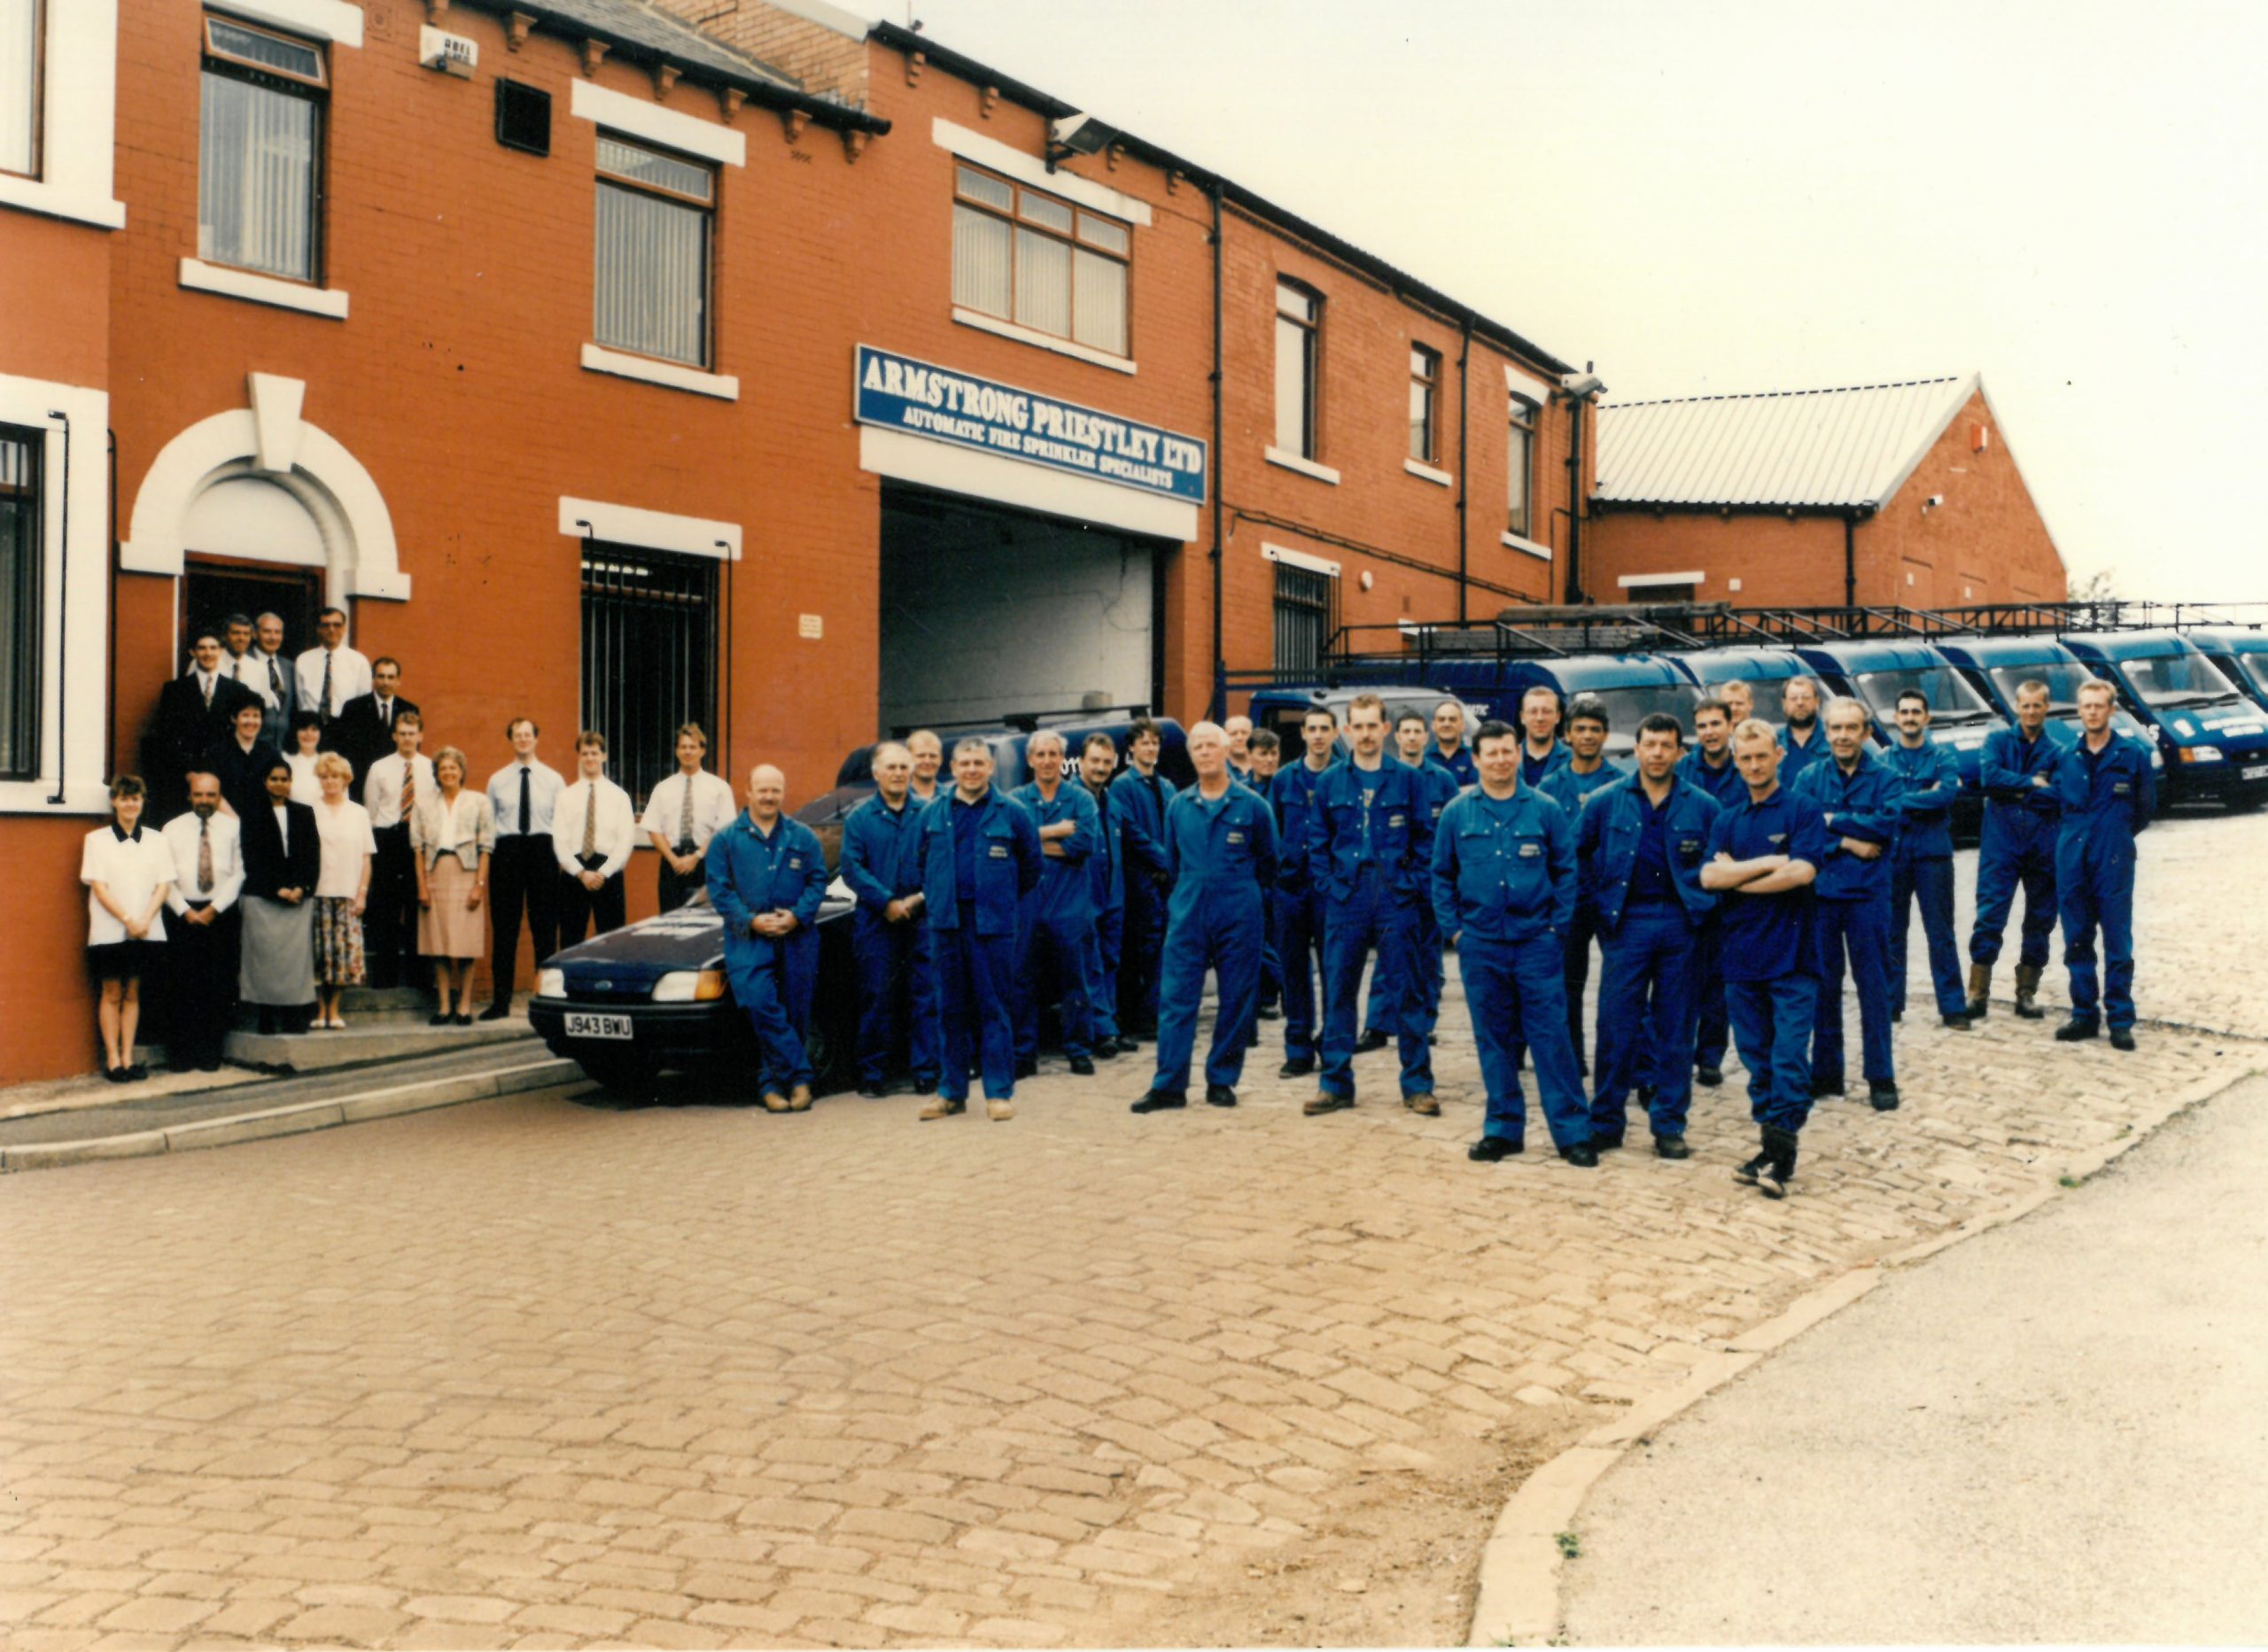 1995 Armstrong Priestley Employees outside of Flaxton House